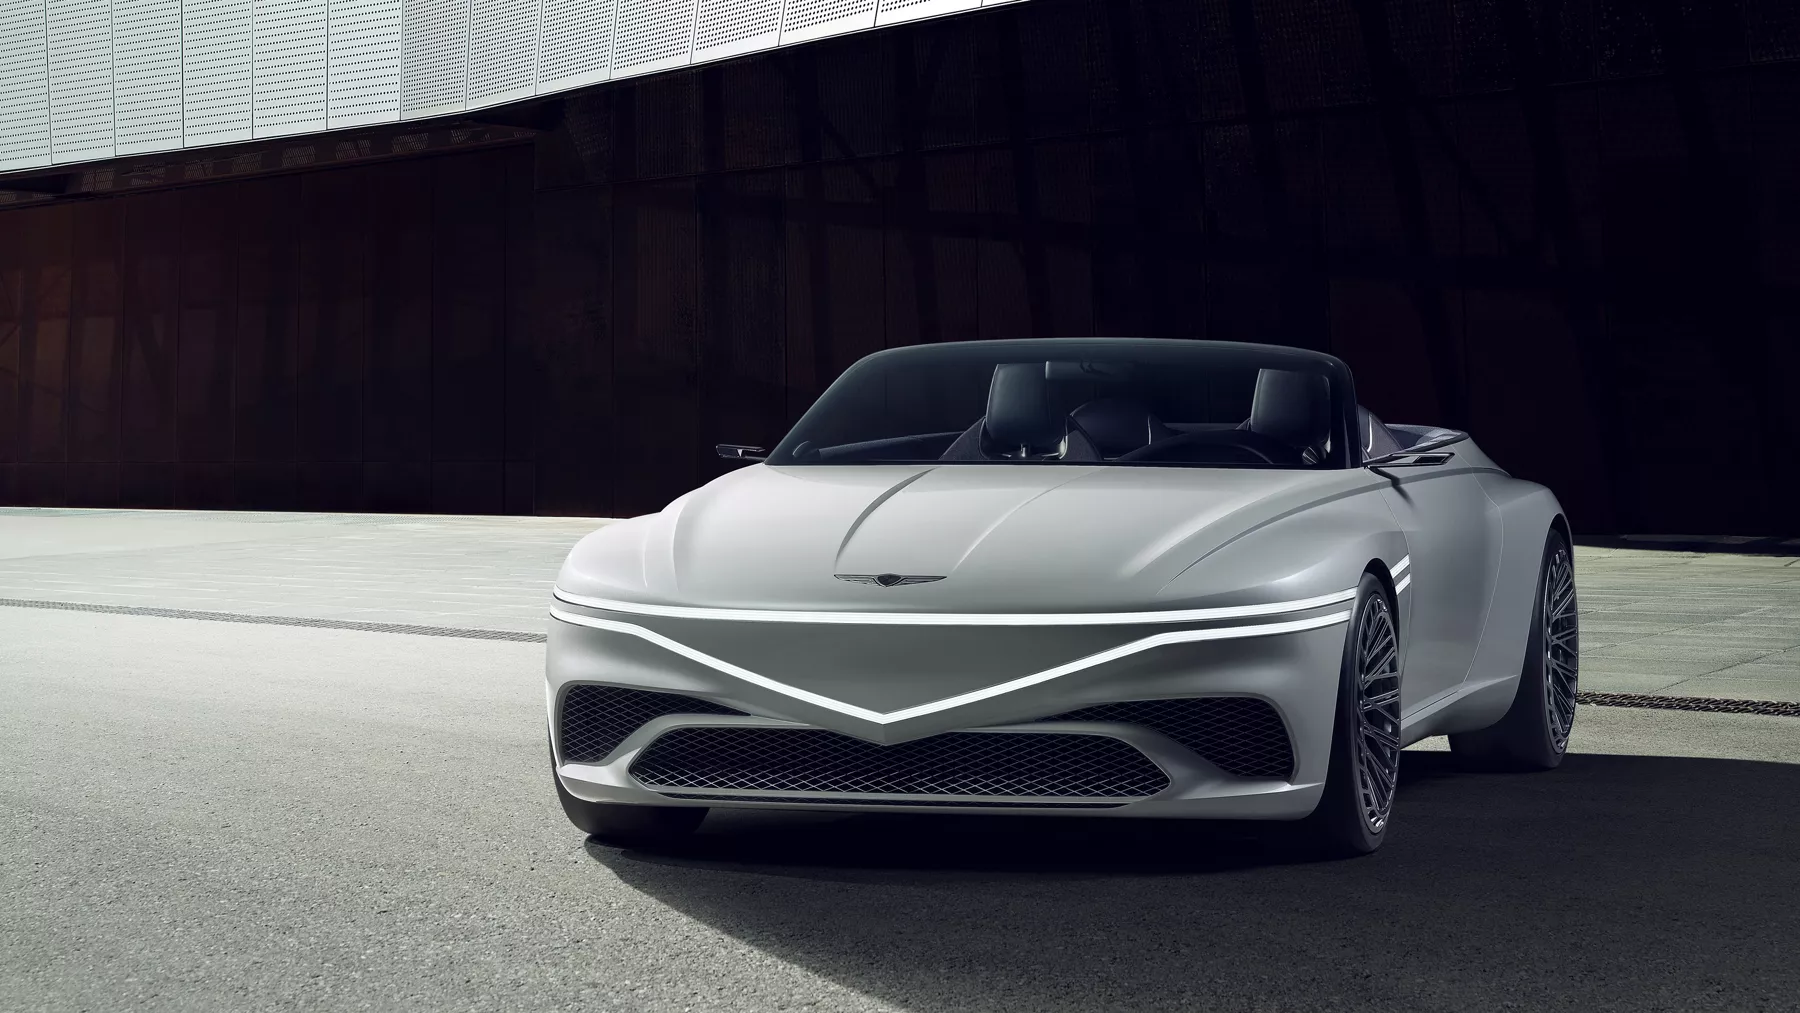 Front view of parked X Convertible Concept with headlights illuminated.